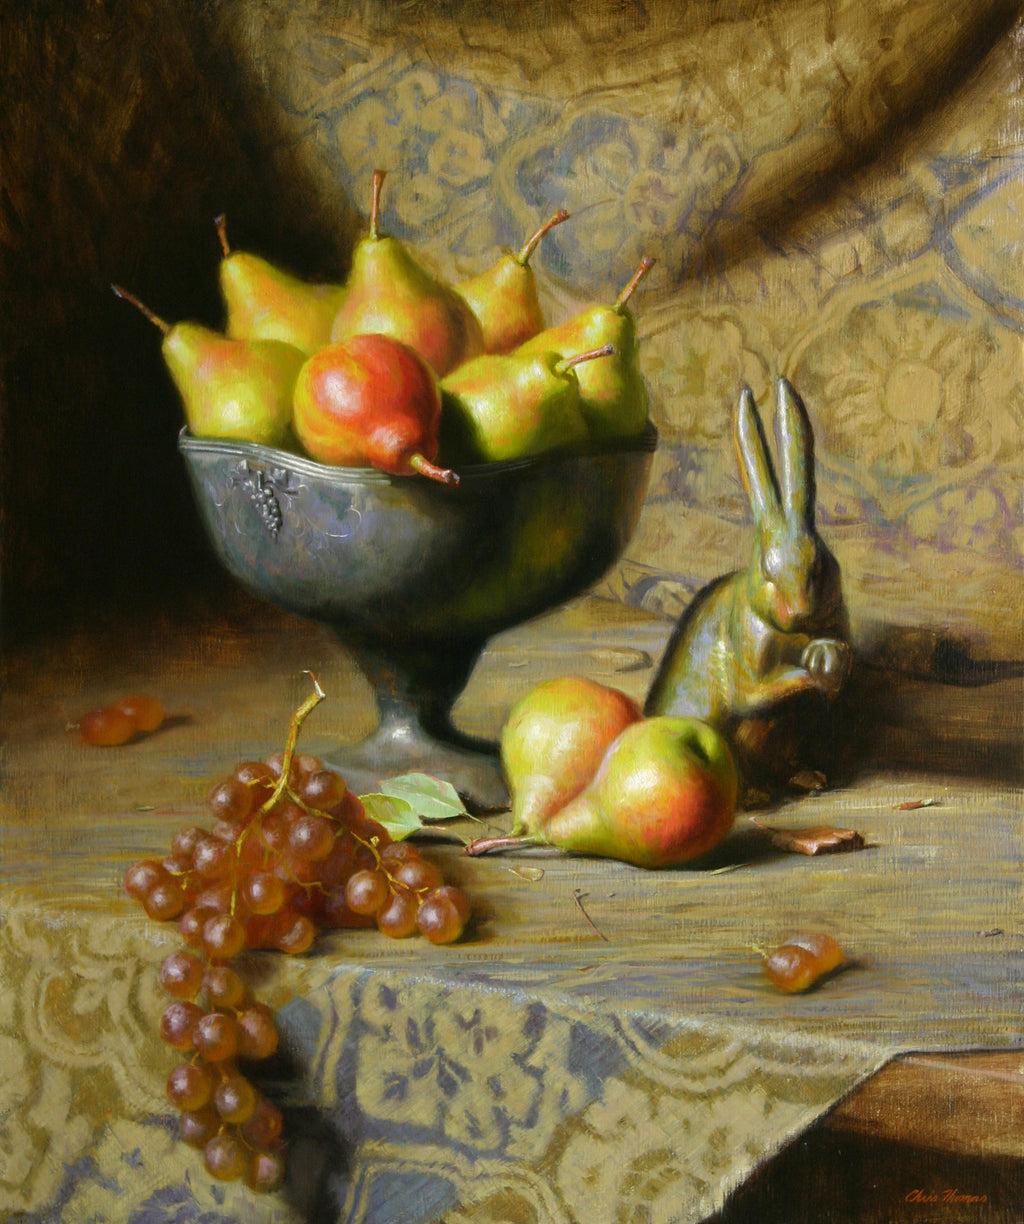 Rabbit and Pears Original Oil Painting by Chris Thomas